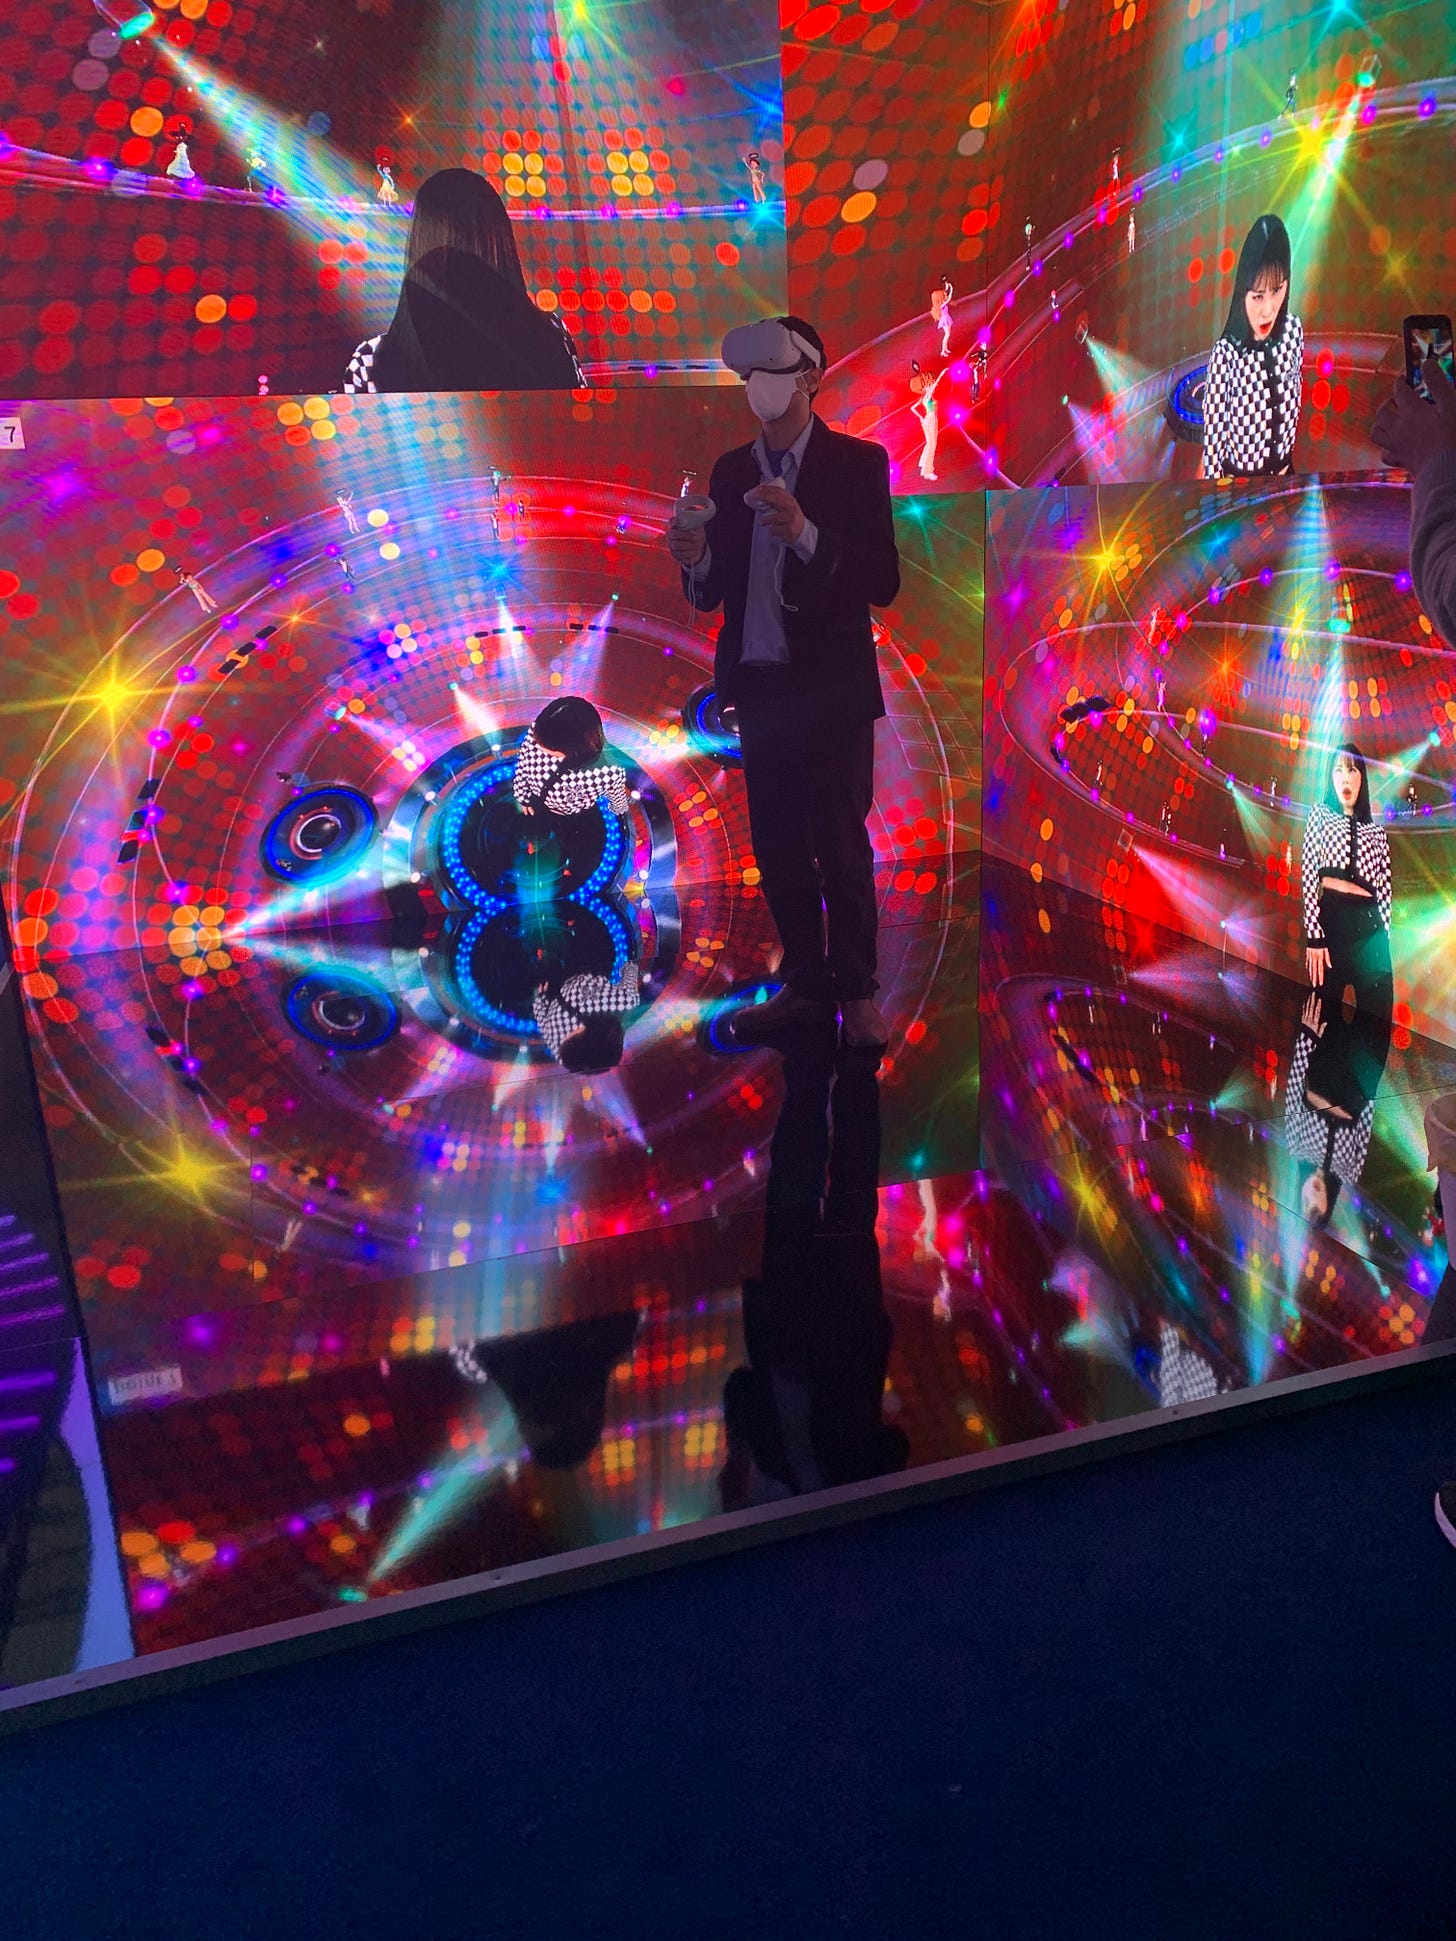 A man in a suit wears a mask, VR headset, and hand controllers while he stands in a technicolor cube (missing three sides, which is how we can see into it).